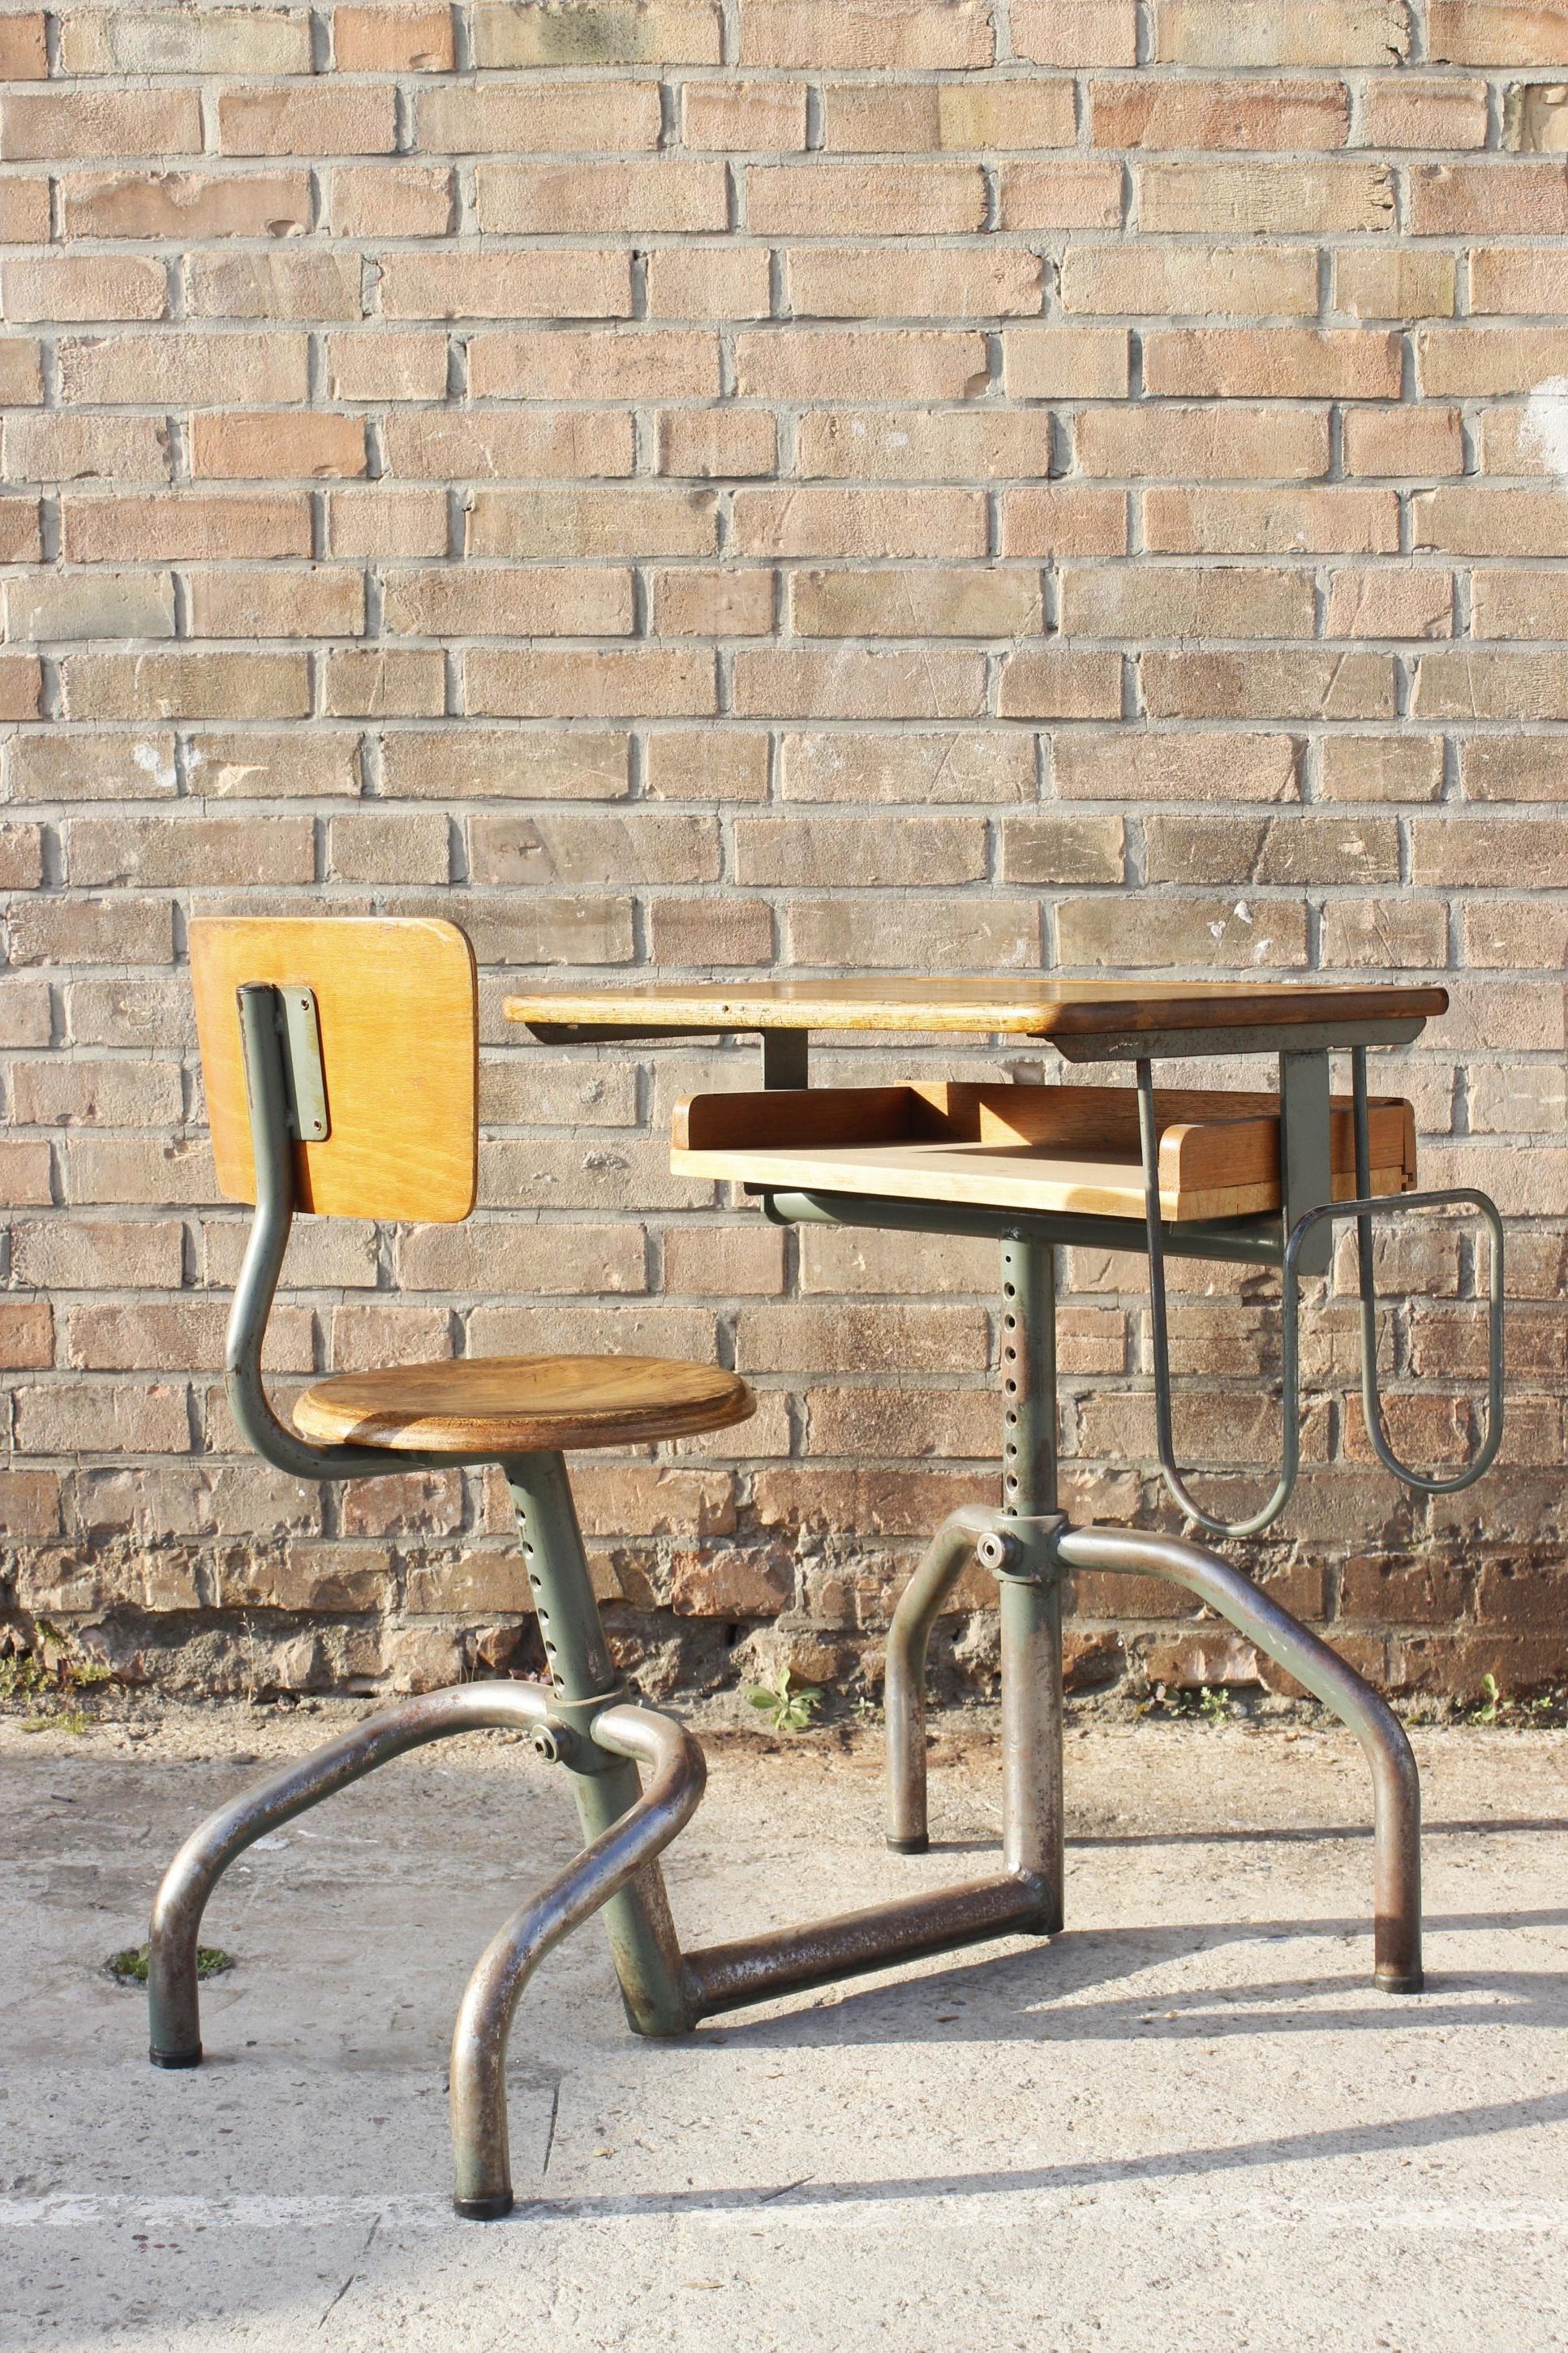 Adaptable school desk designed by Jacques Hitier, produced by Mobilor France in the 1950s, often falsely attributed to Jean Prouvé. 

The design is typical of the production of post-war french reconstruction era, with the specificity of having both